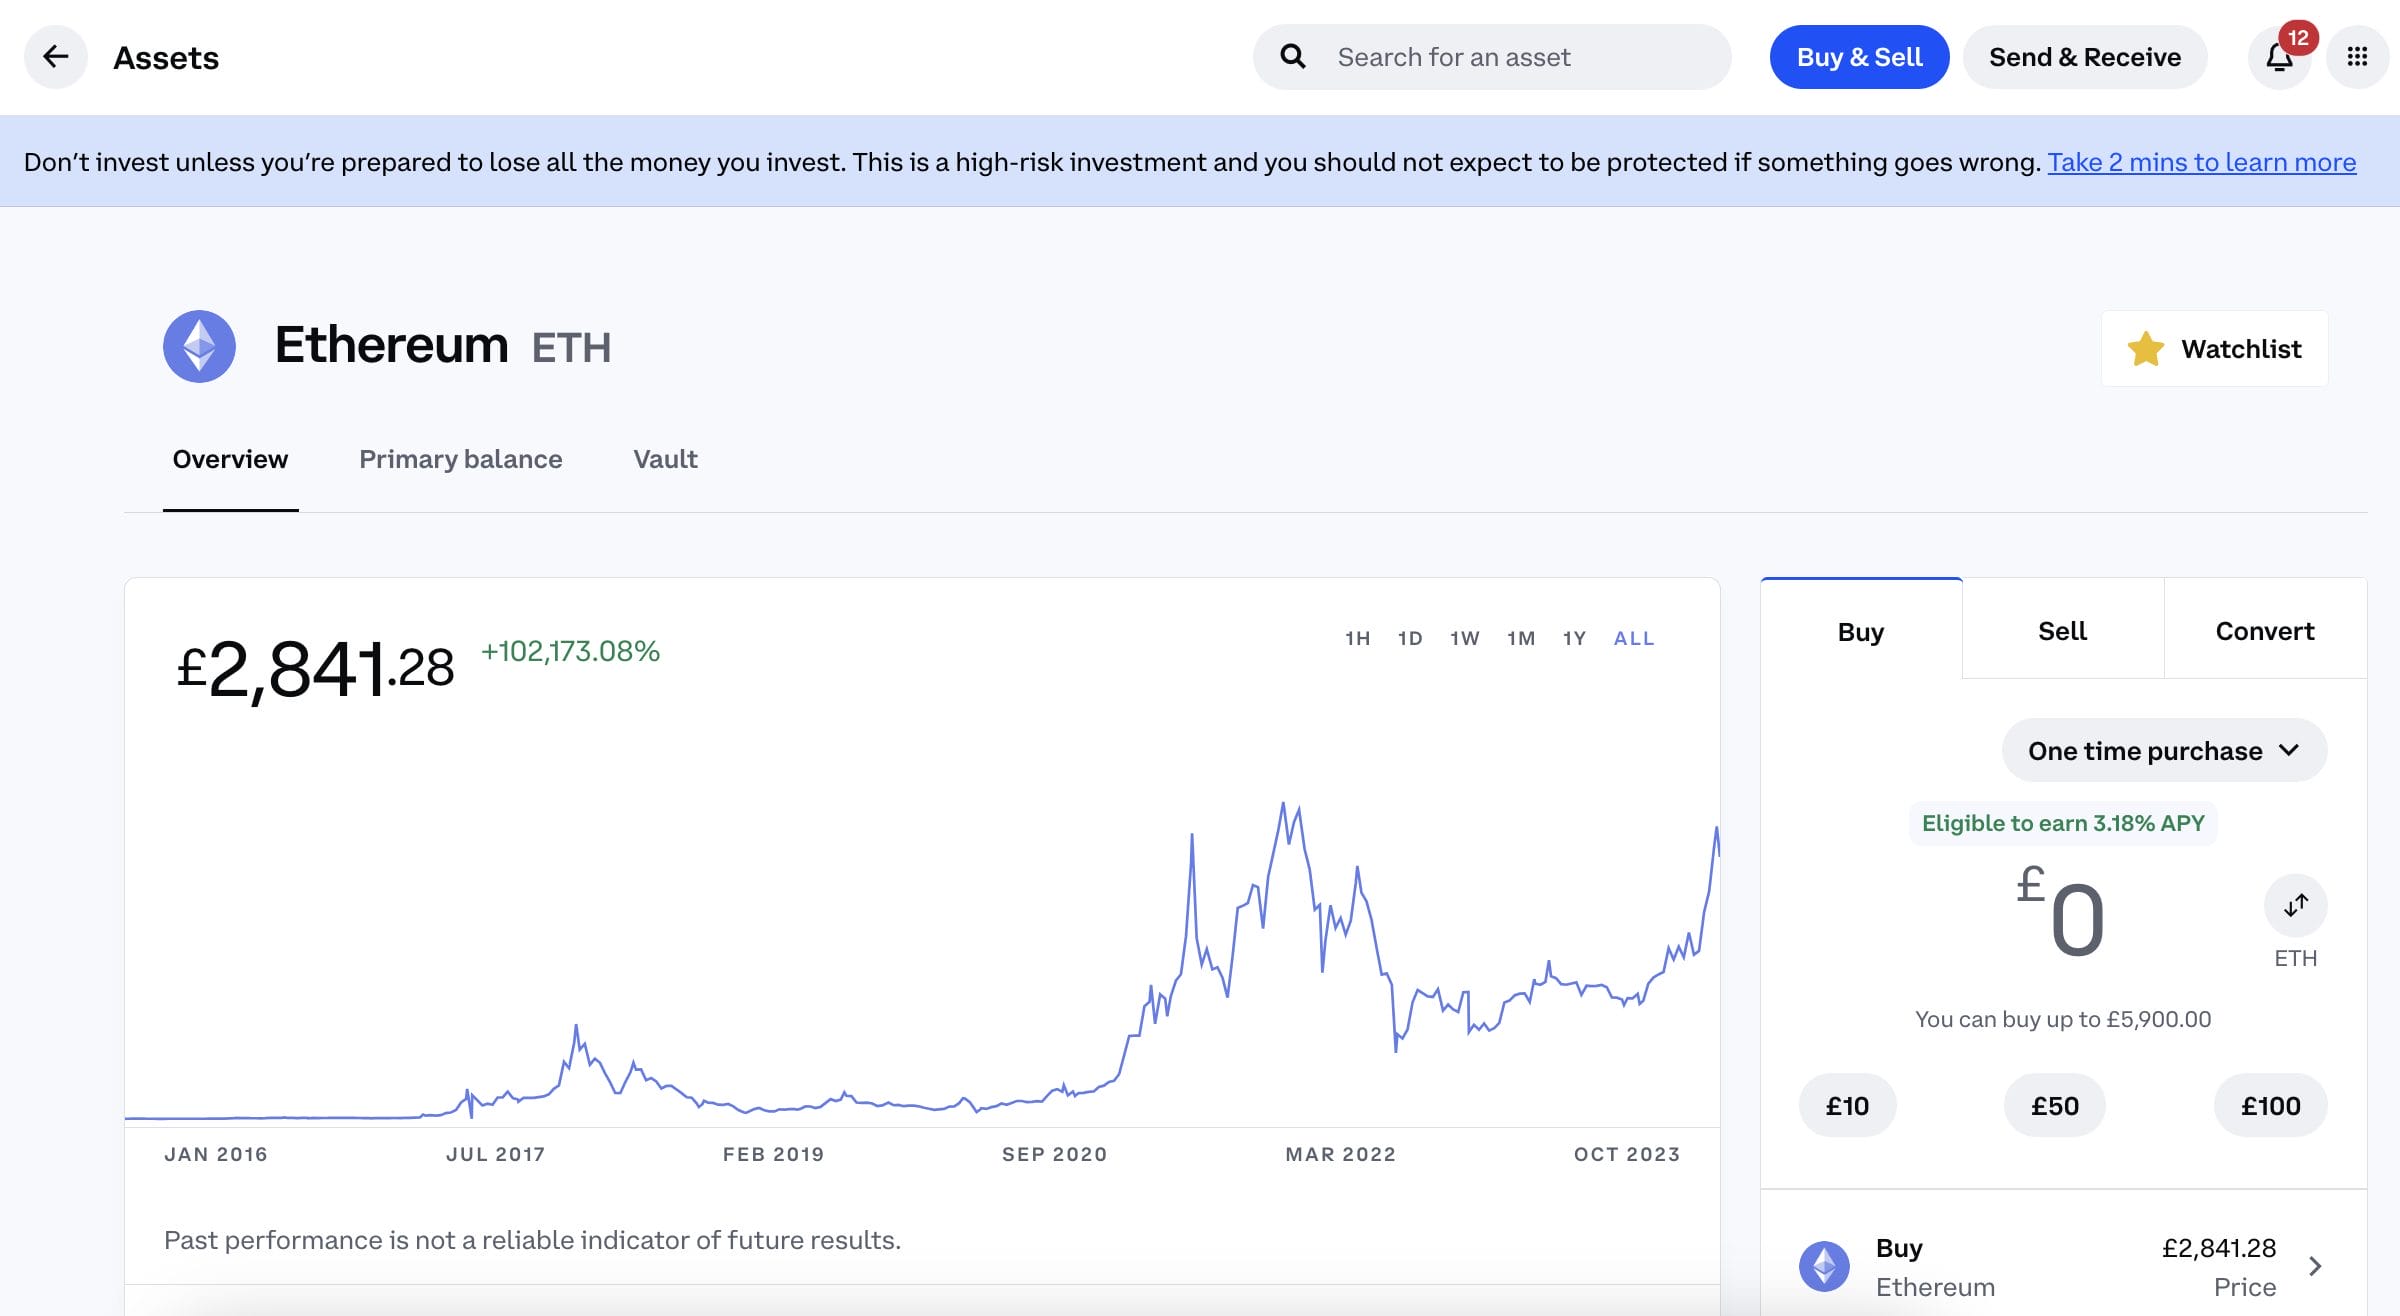 How to buy Ethereum on Coinbase 